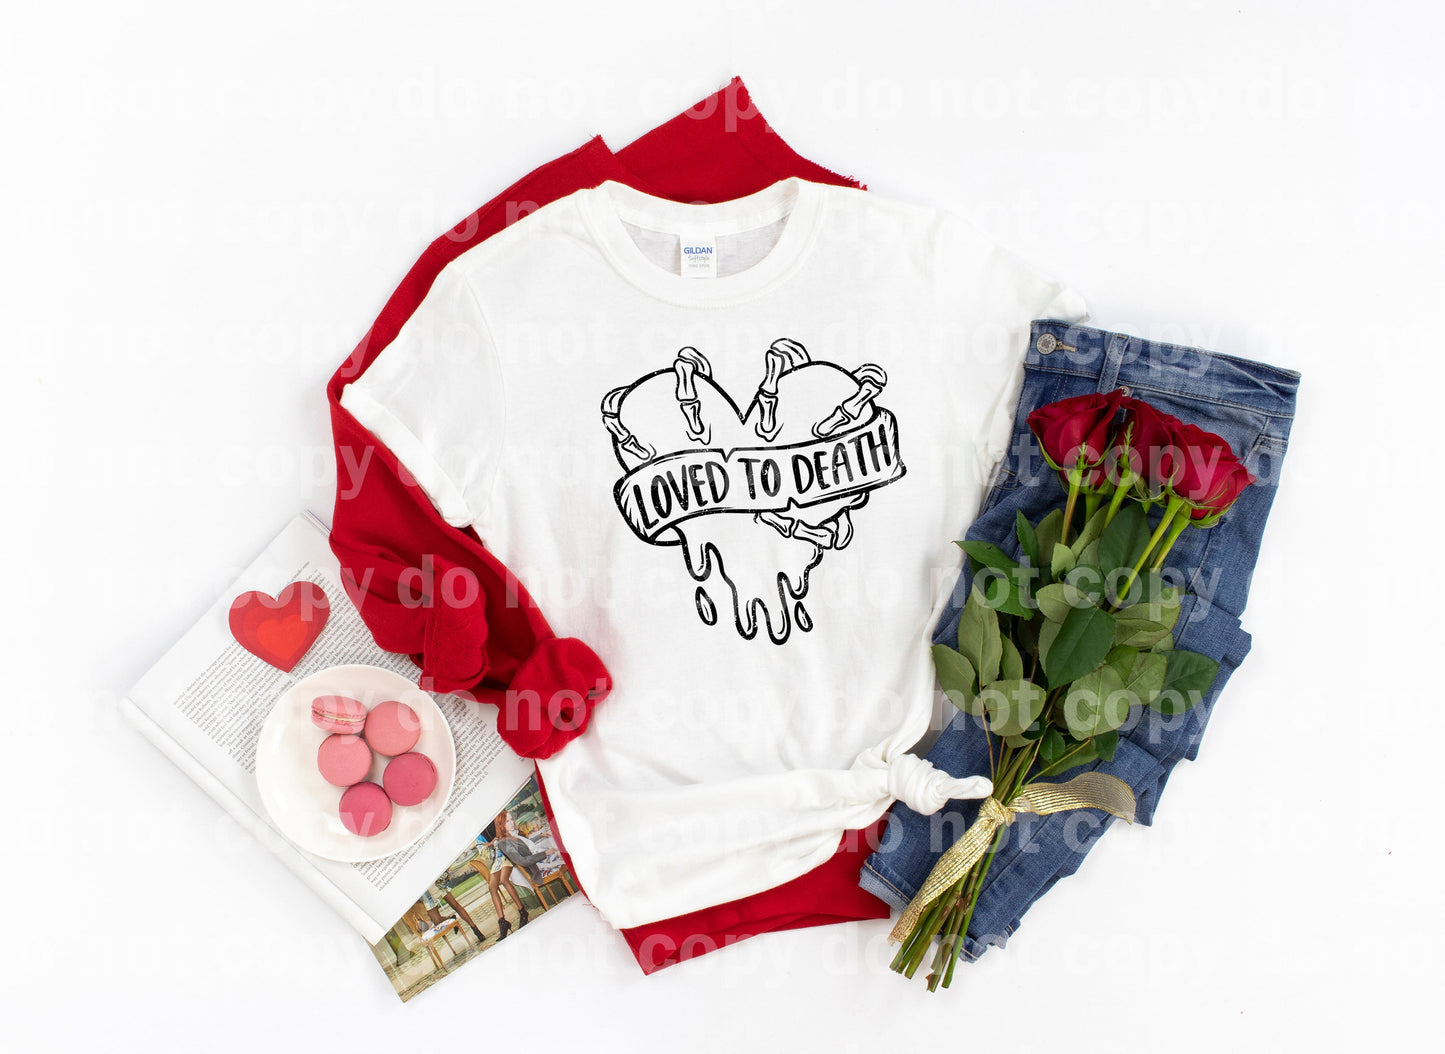 Loved To Death Distressed Full Color/One Color Dream Print or Sublimation Print